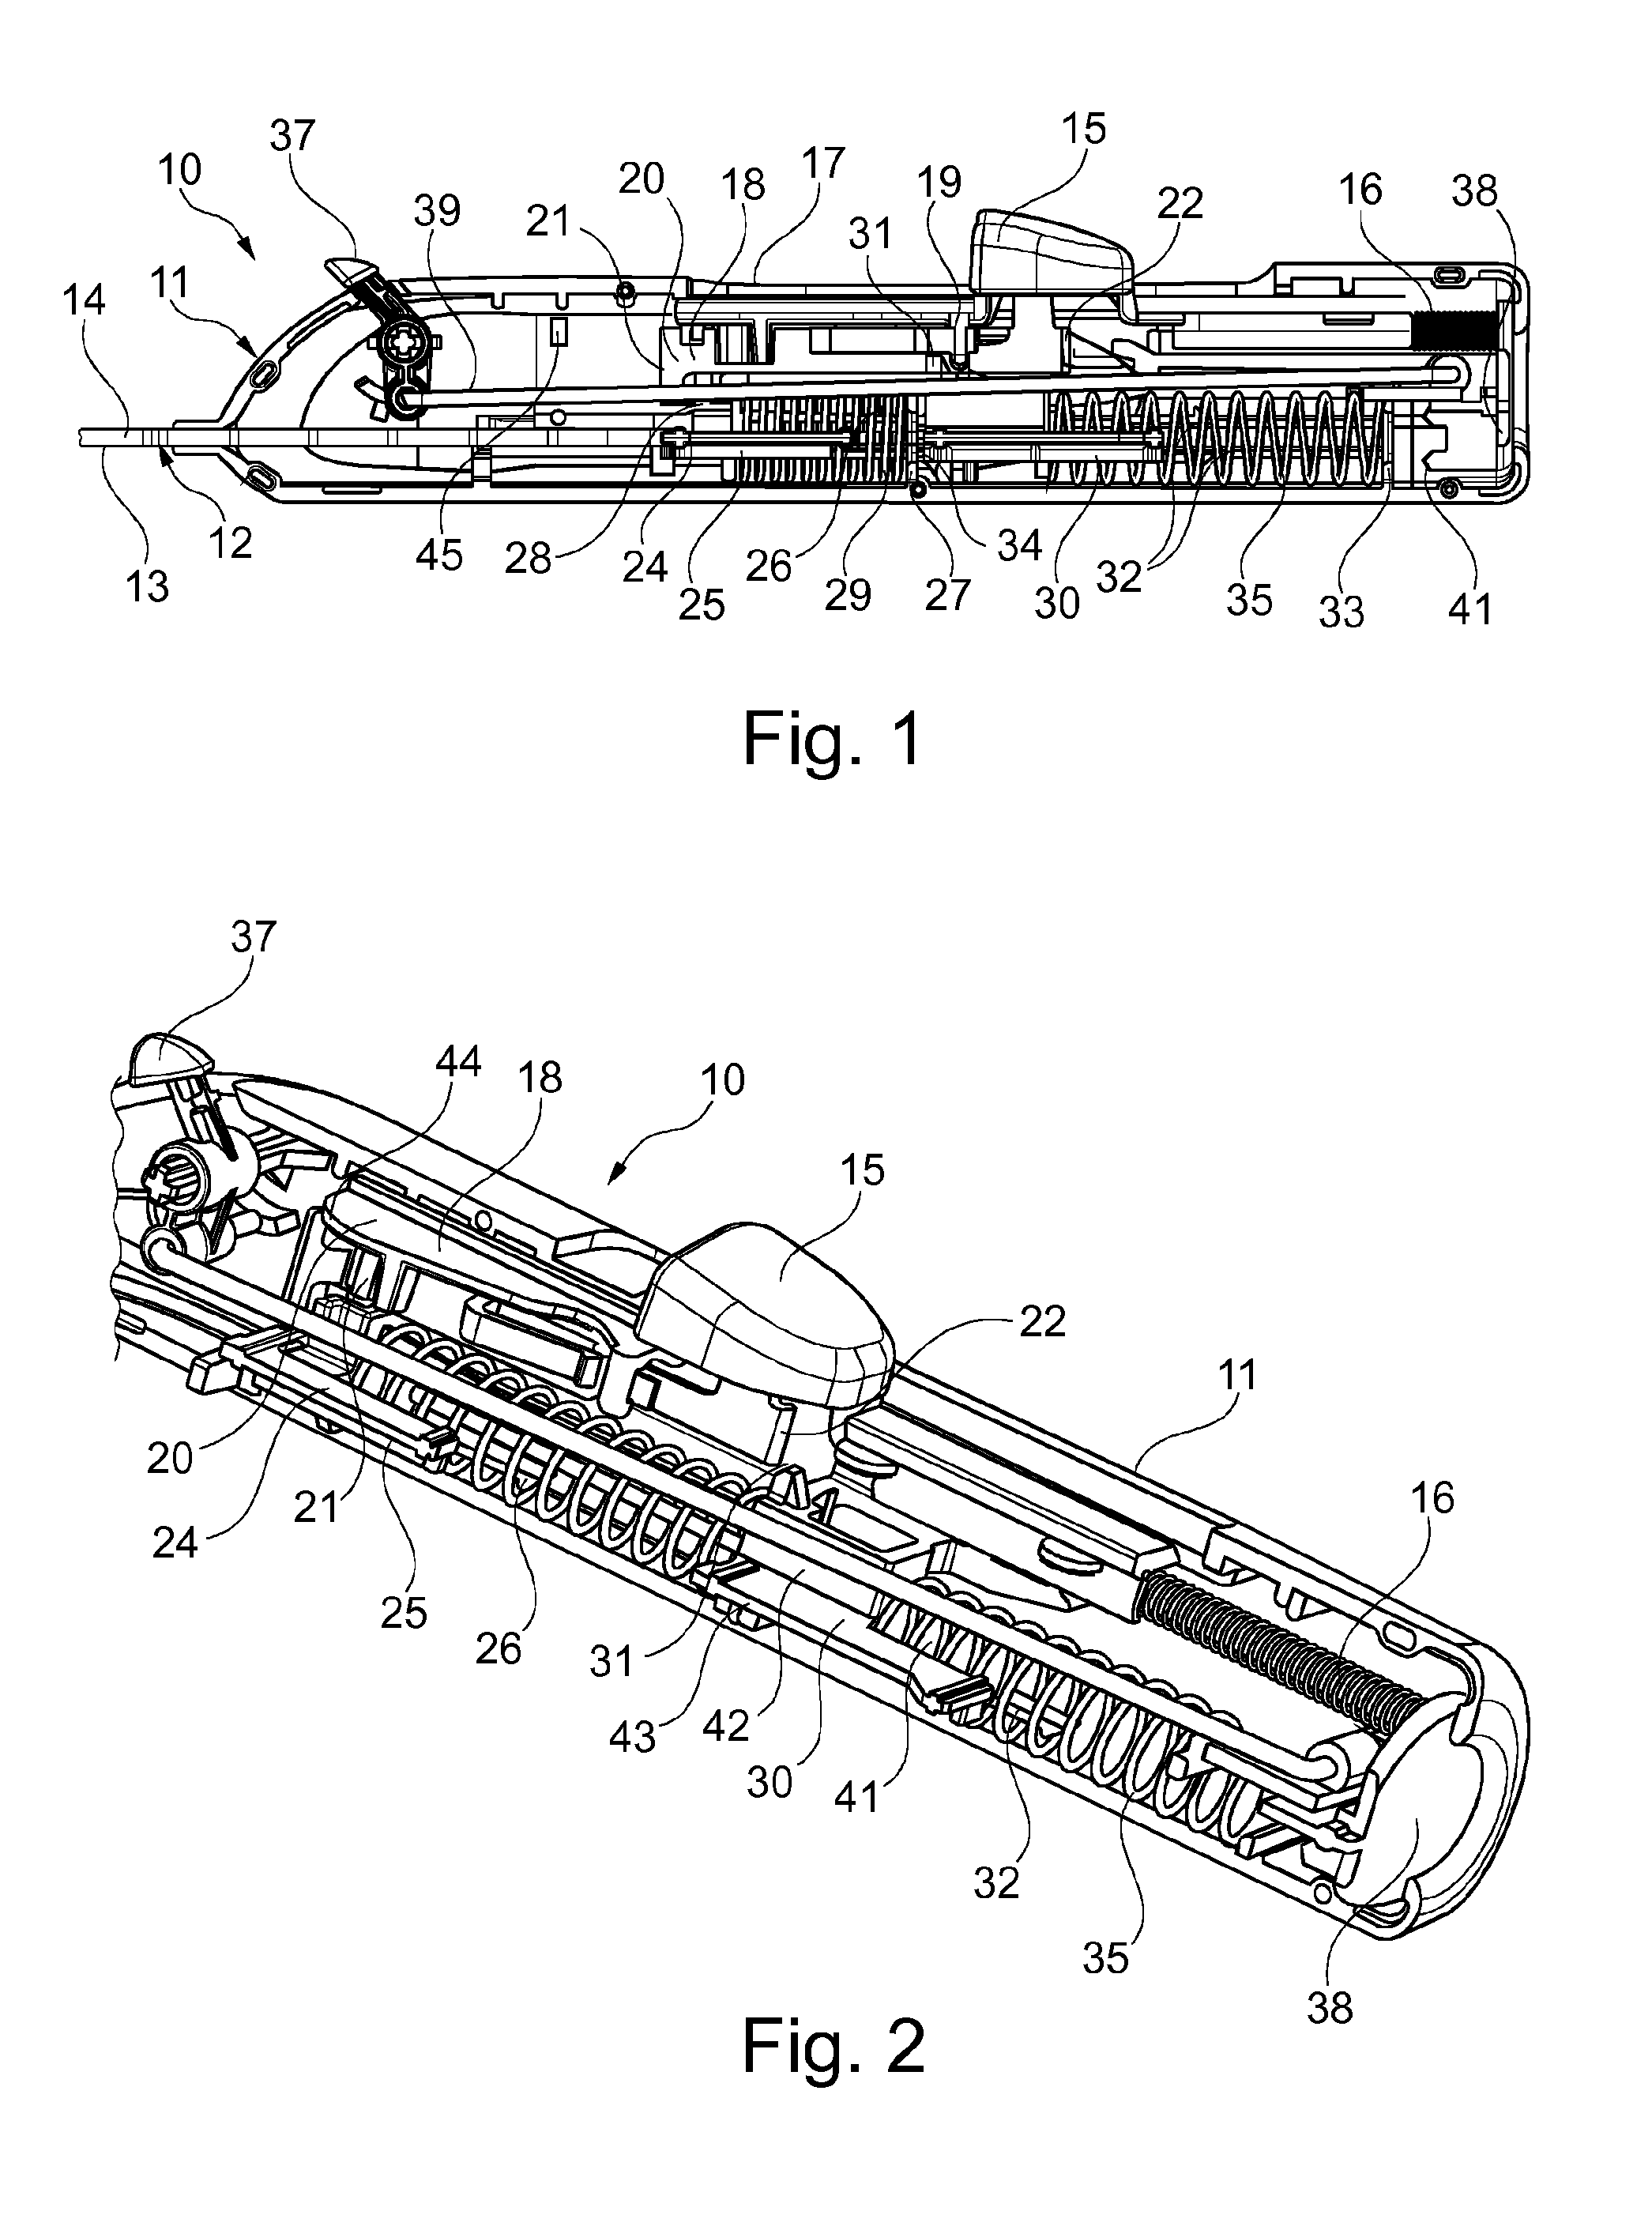 Device for taking at least one sample of tissue